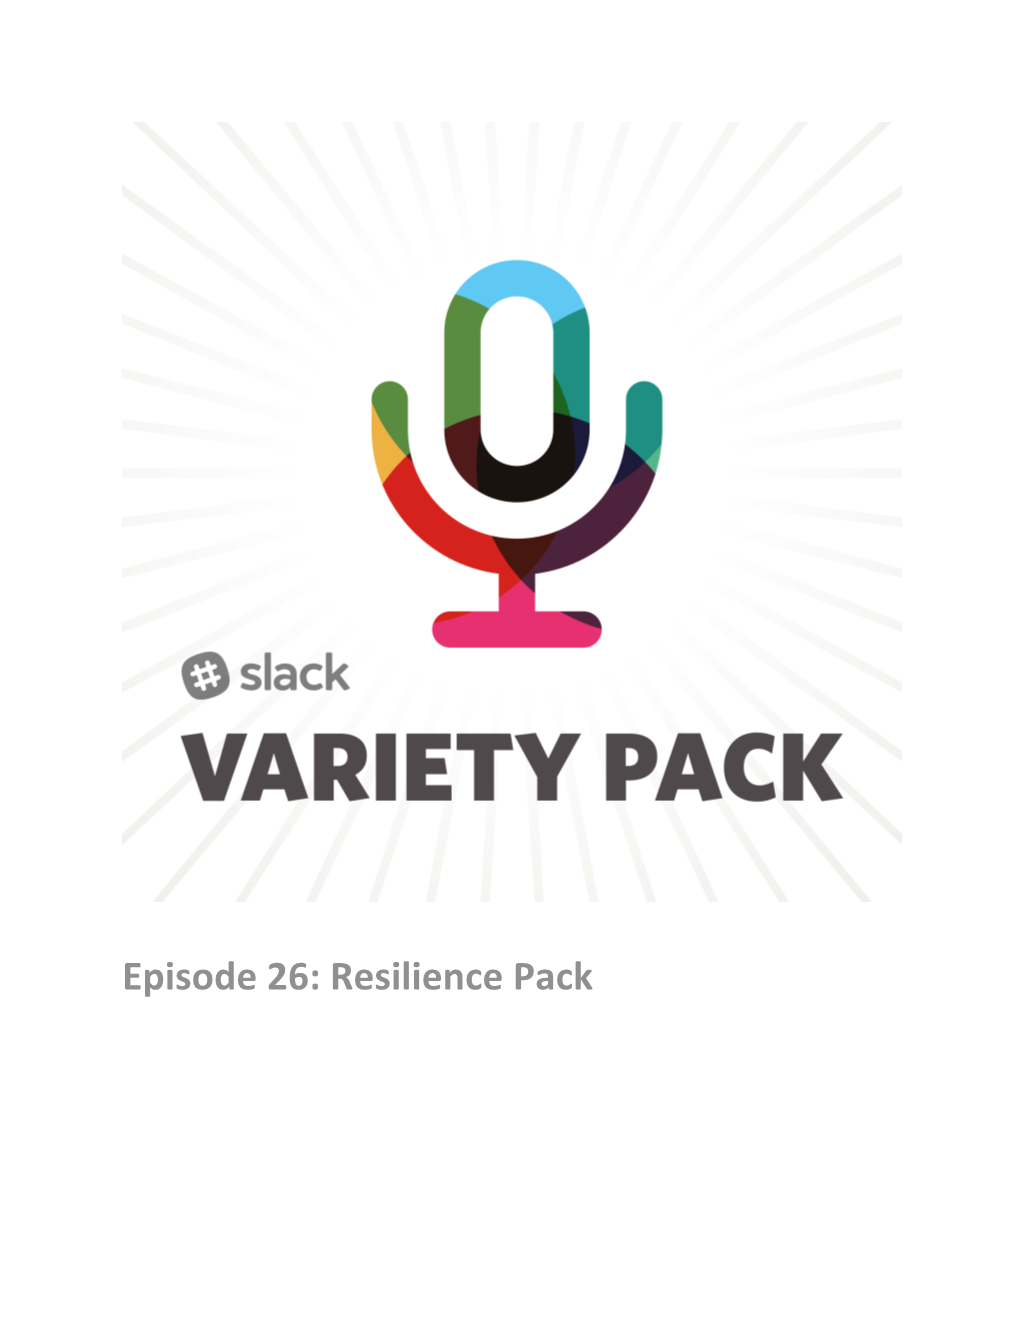 Episode 26: Resilience Pack